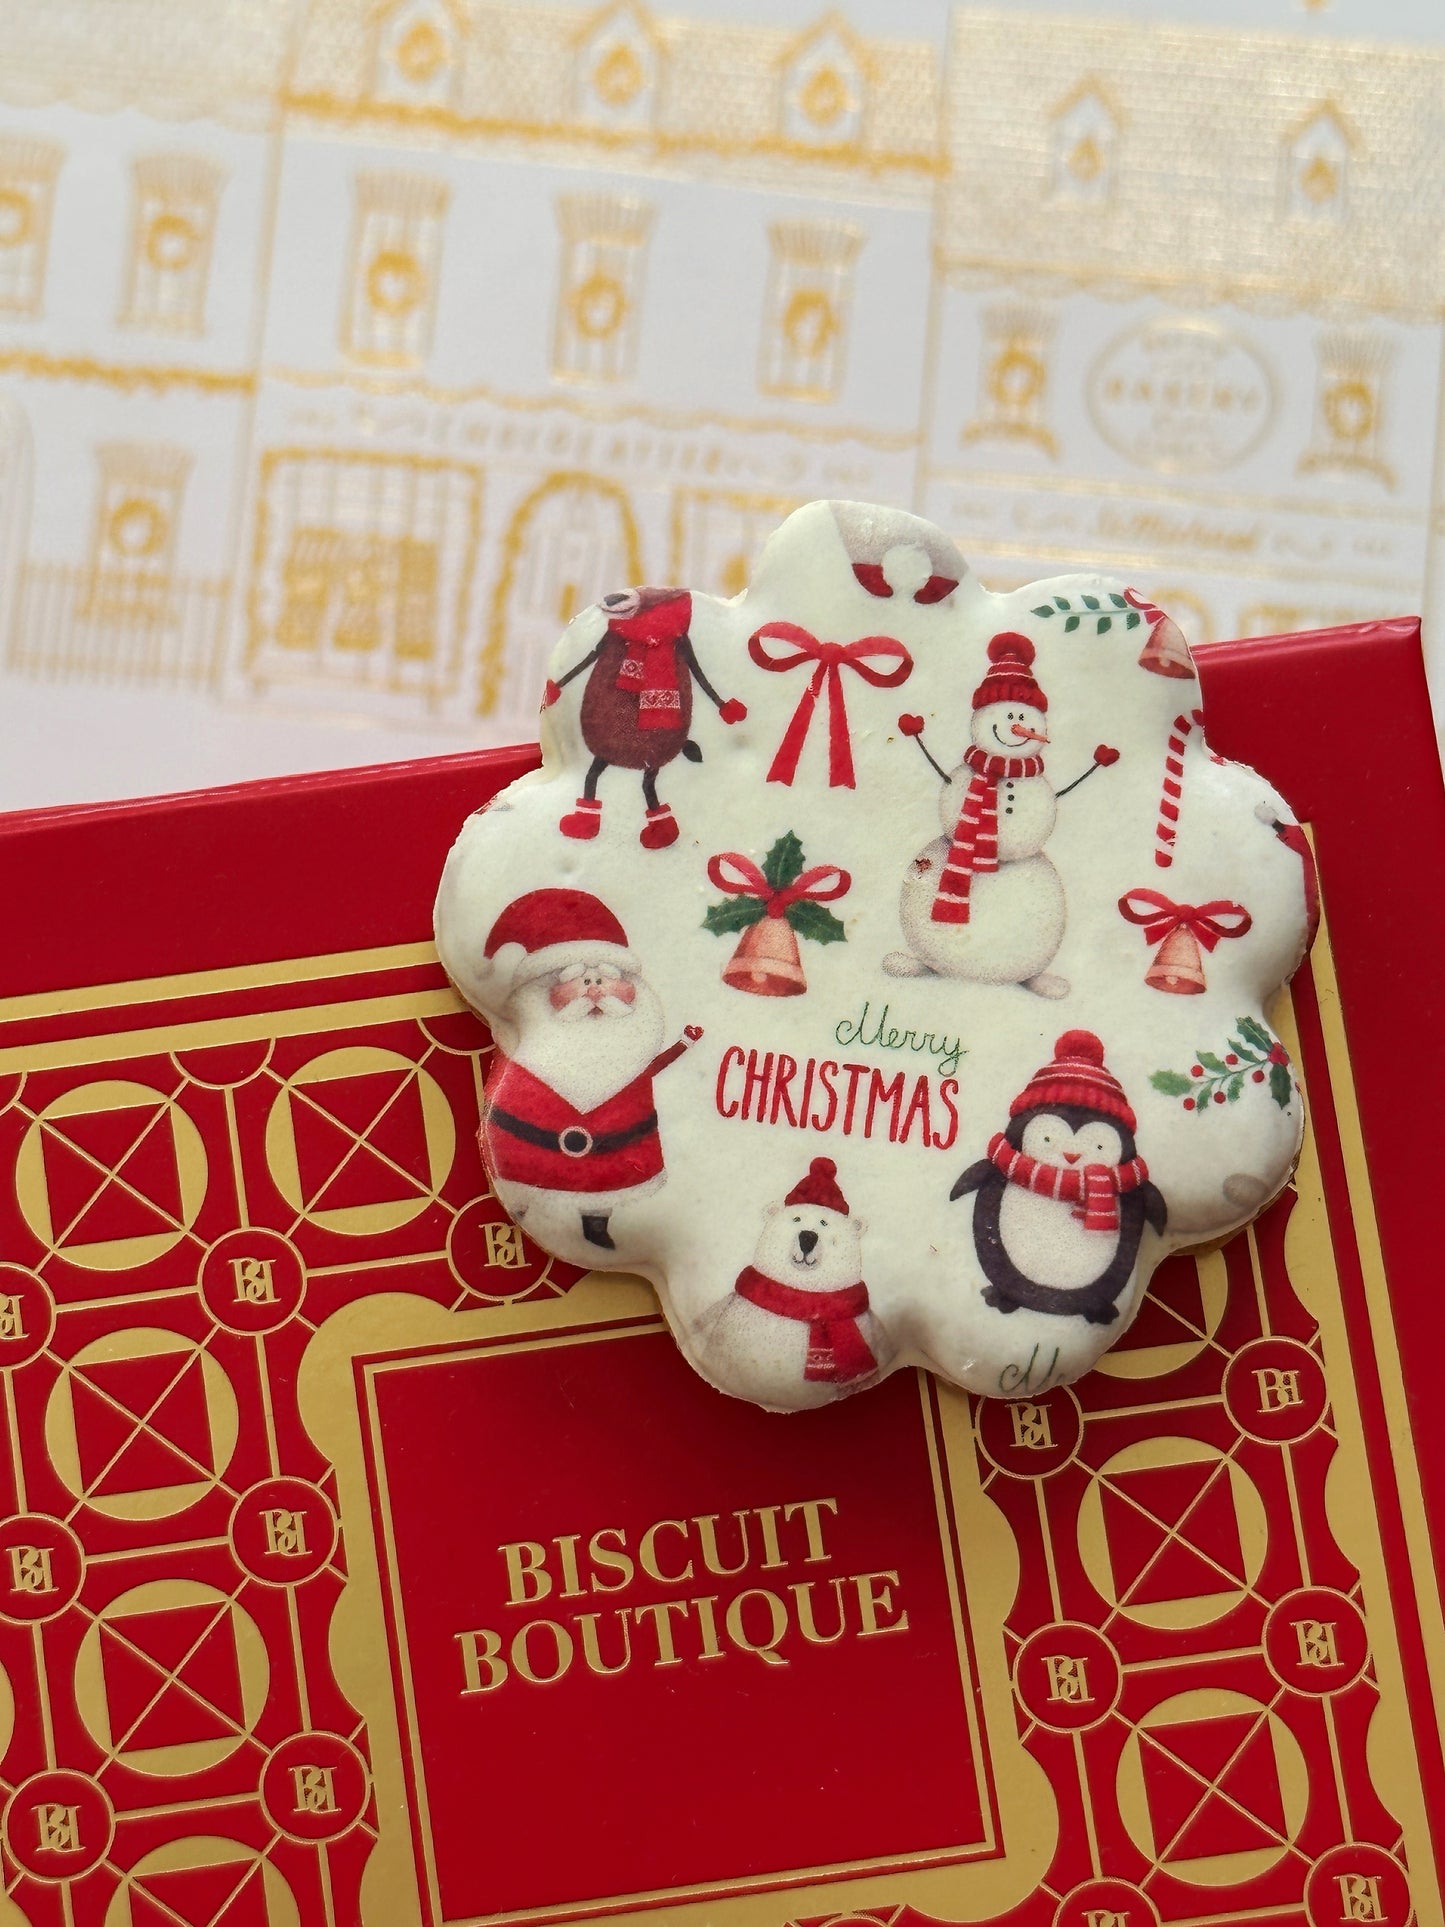 Christmas Bundle - 2boxes of Speculoos with a twist Biscuits